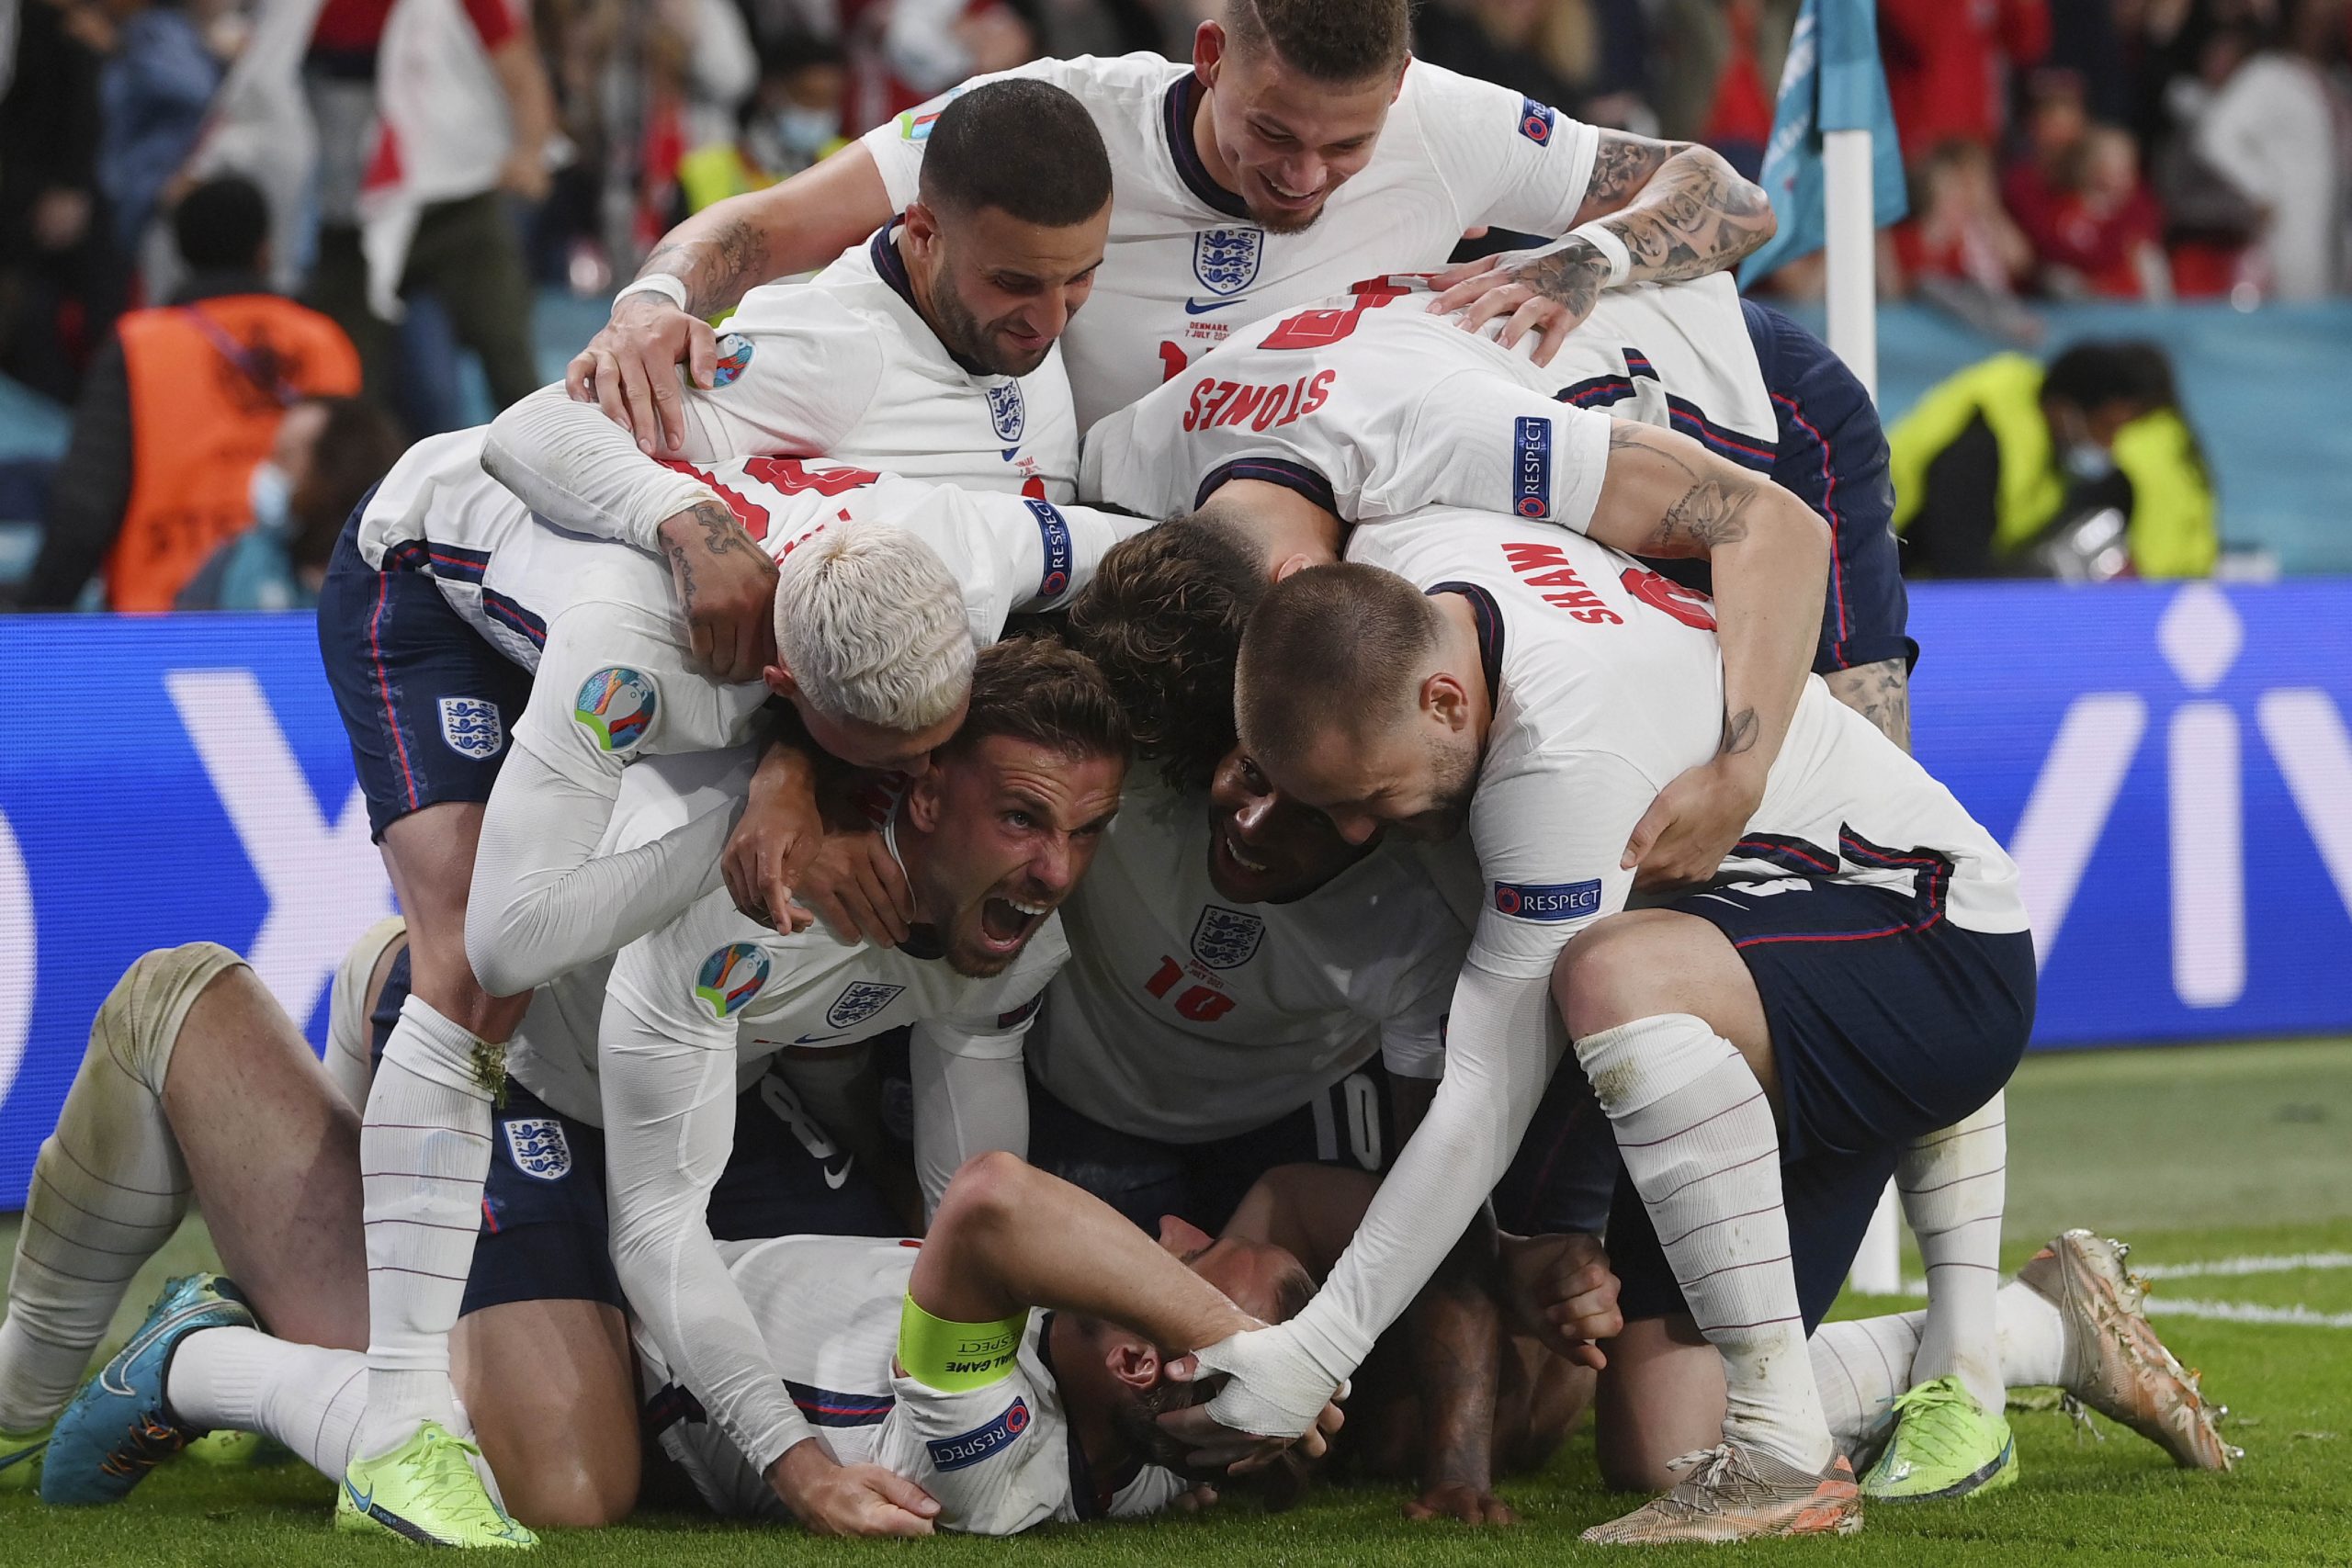 England dare to dream ahead of Euro 2020 final against impressive Italy